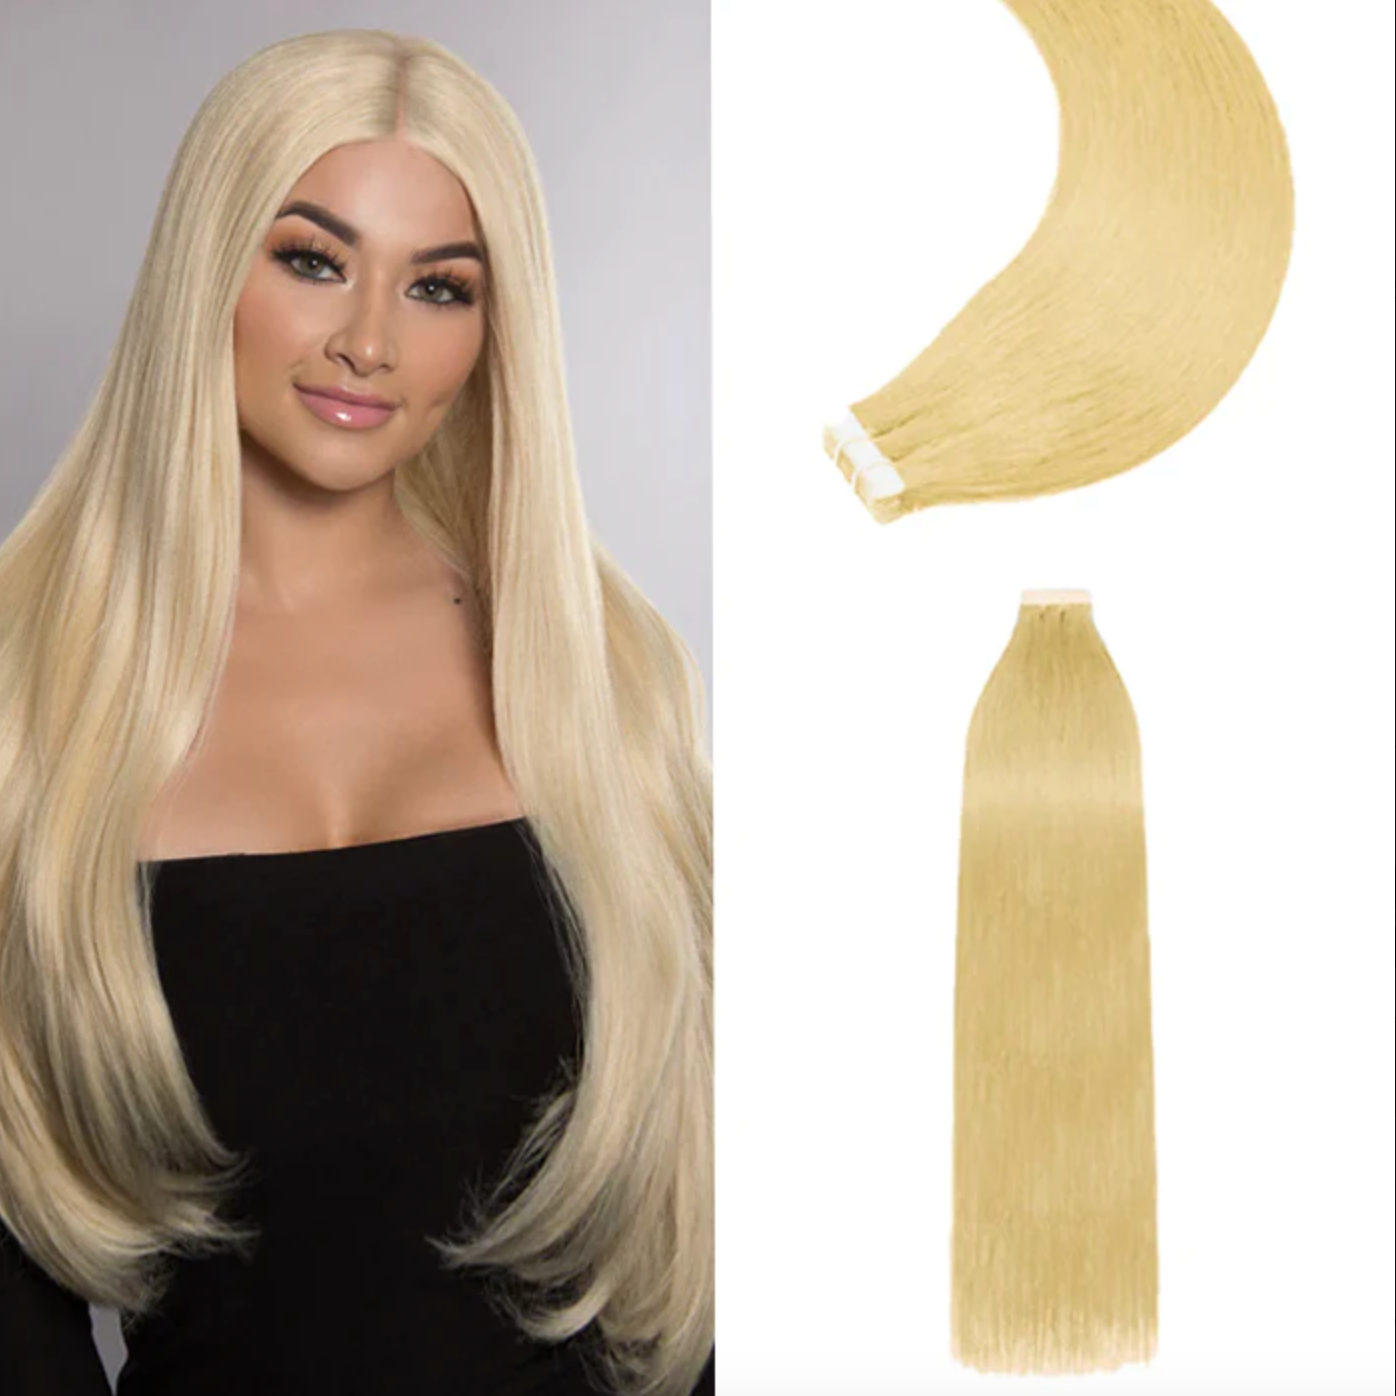 Hair Bae "Cambodian Straight" Russian Blonde" Tape In